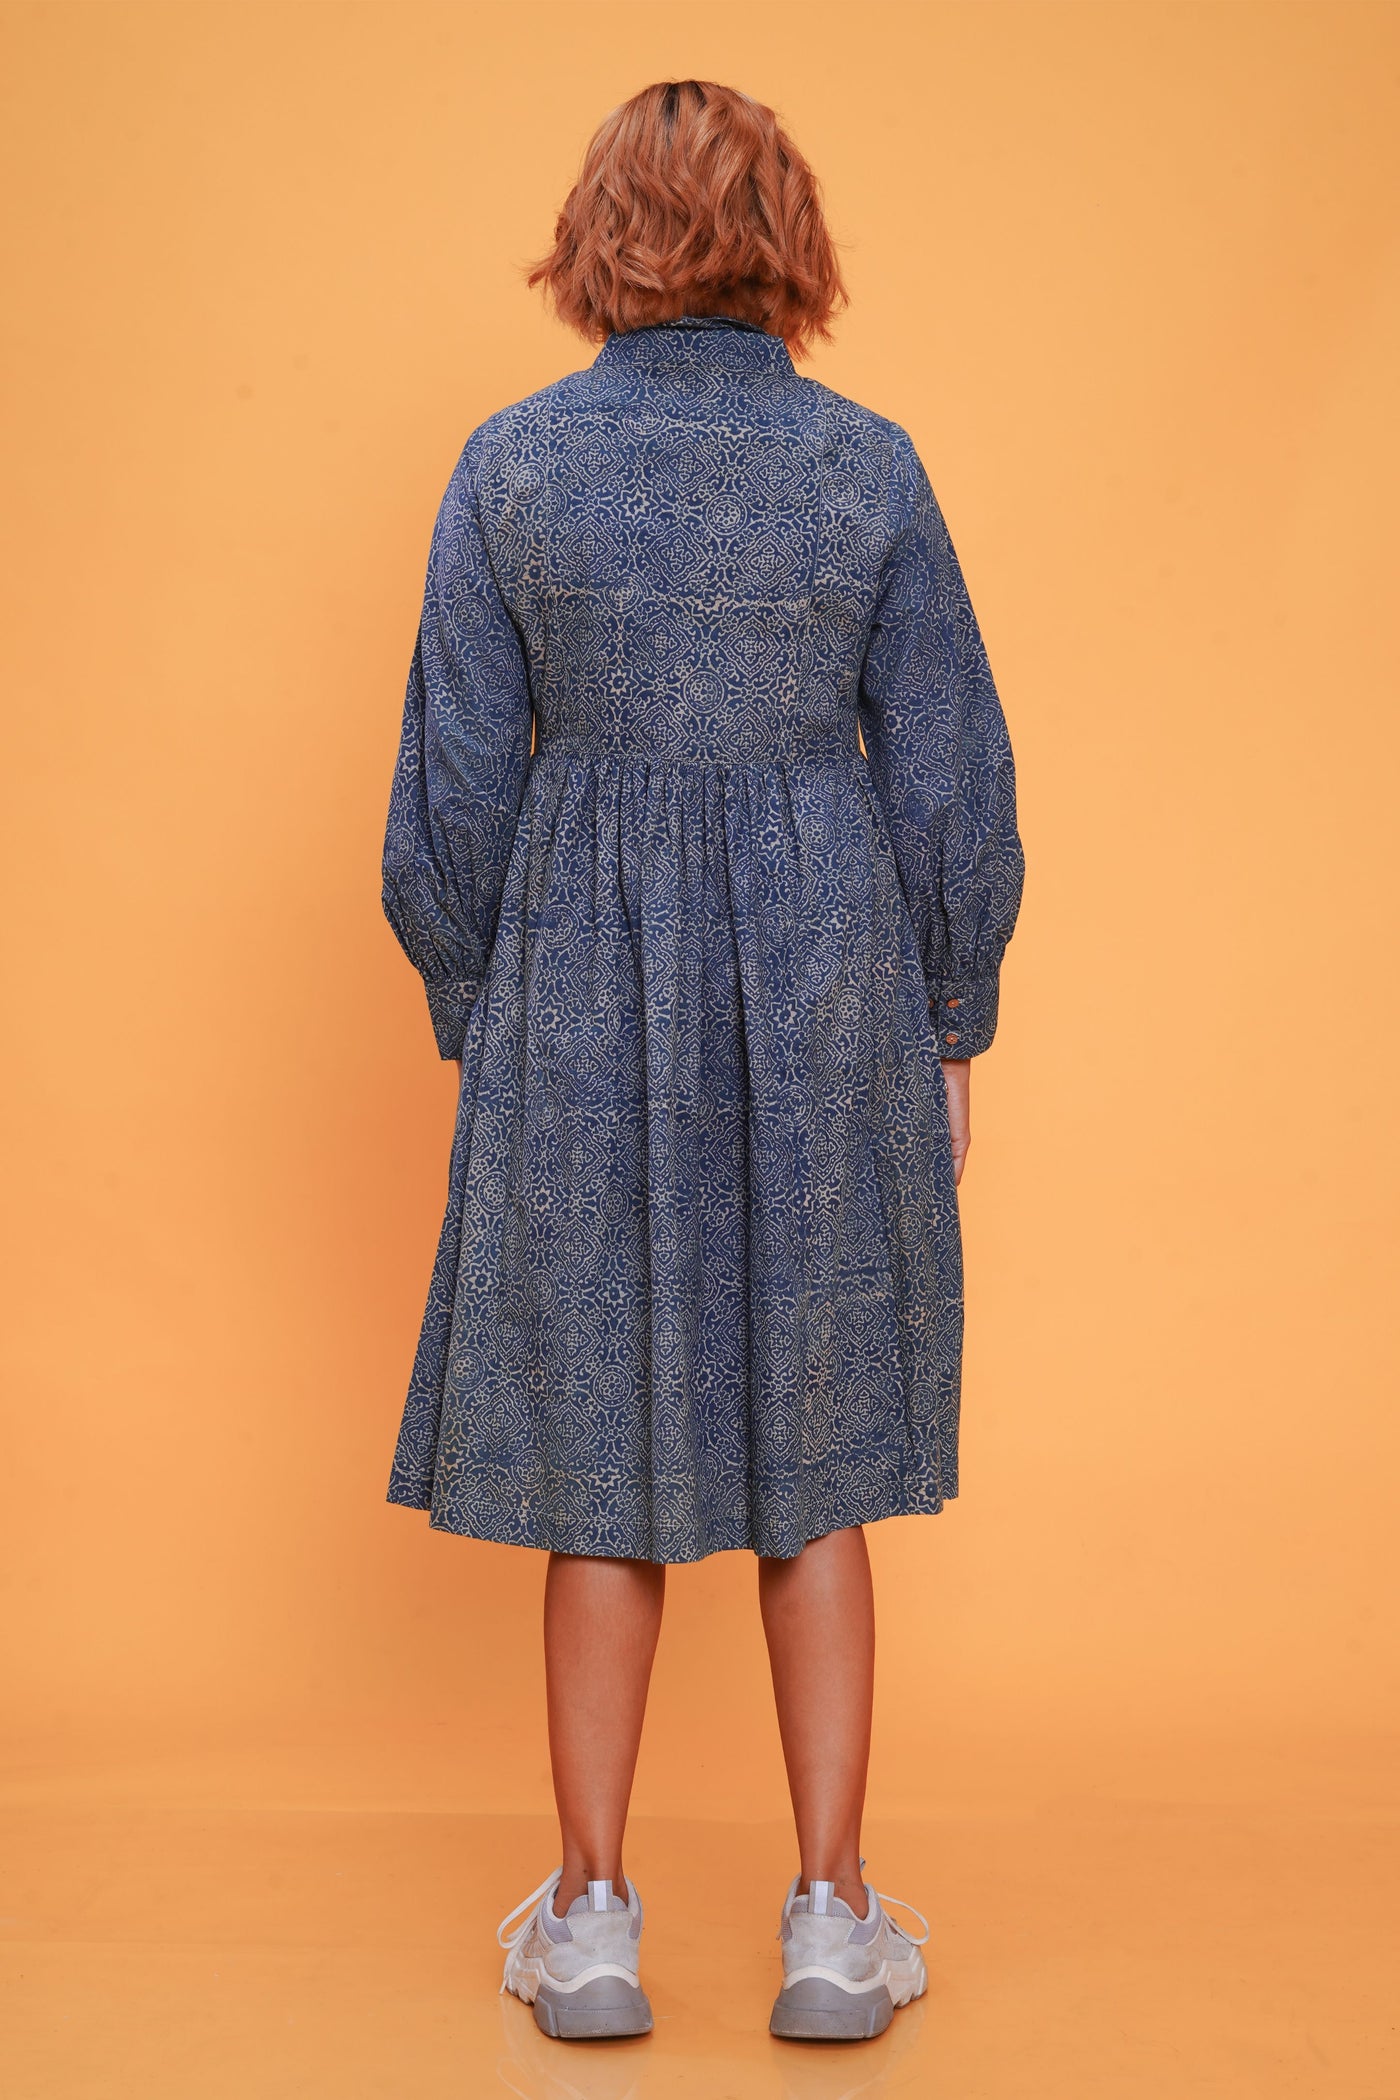 Hand block printed clear sky timeless dress